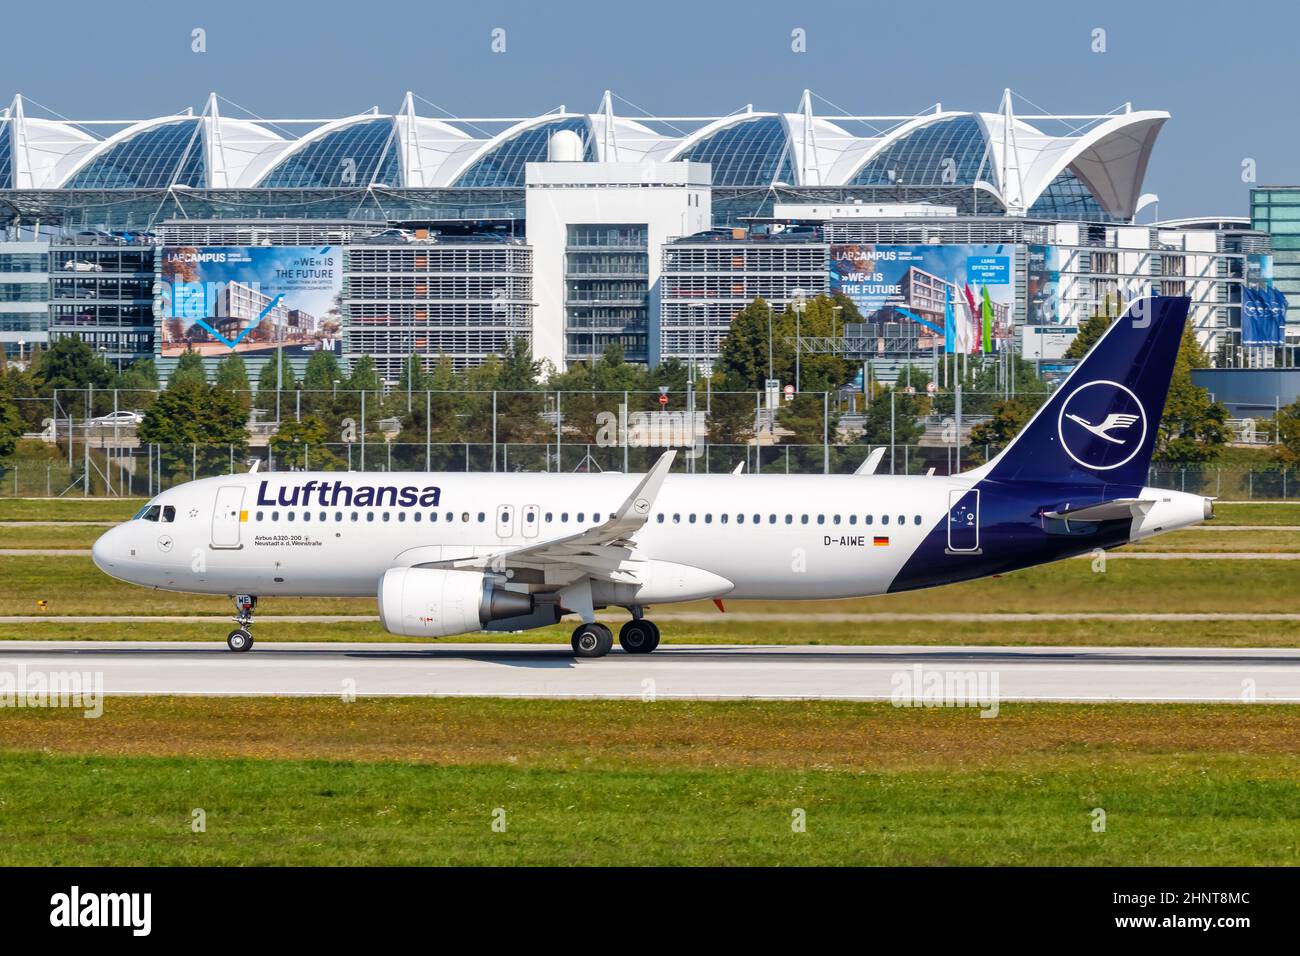 Lufthansa Airbus A320 airplane Munich airport in Germany Stock Photo